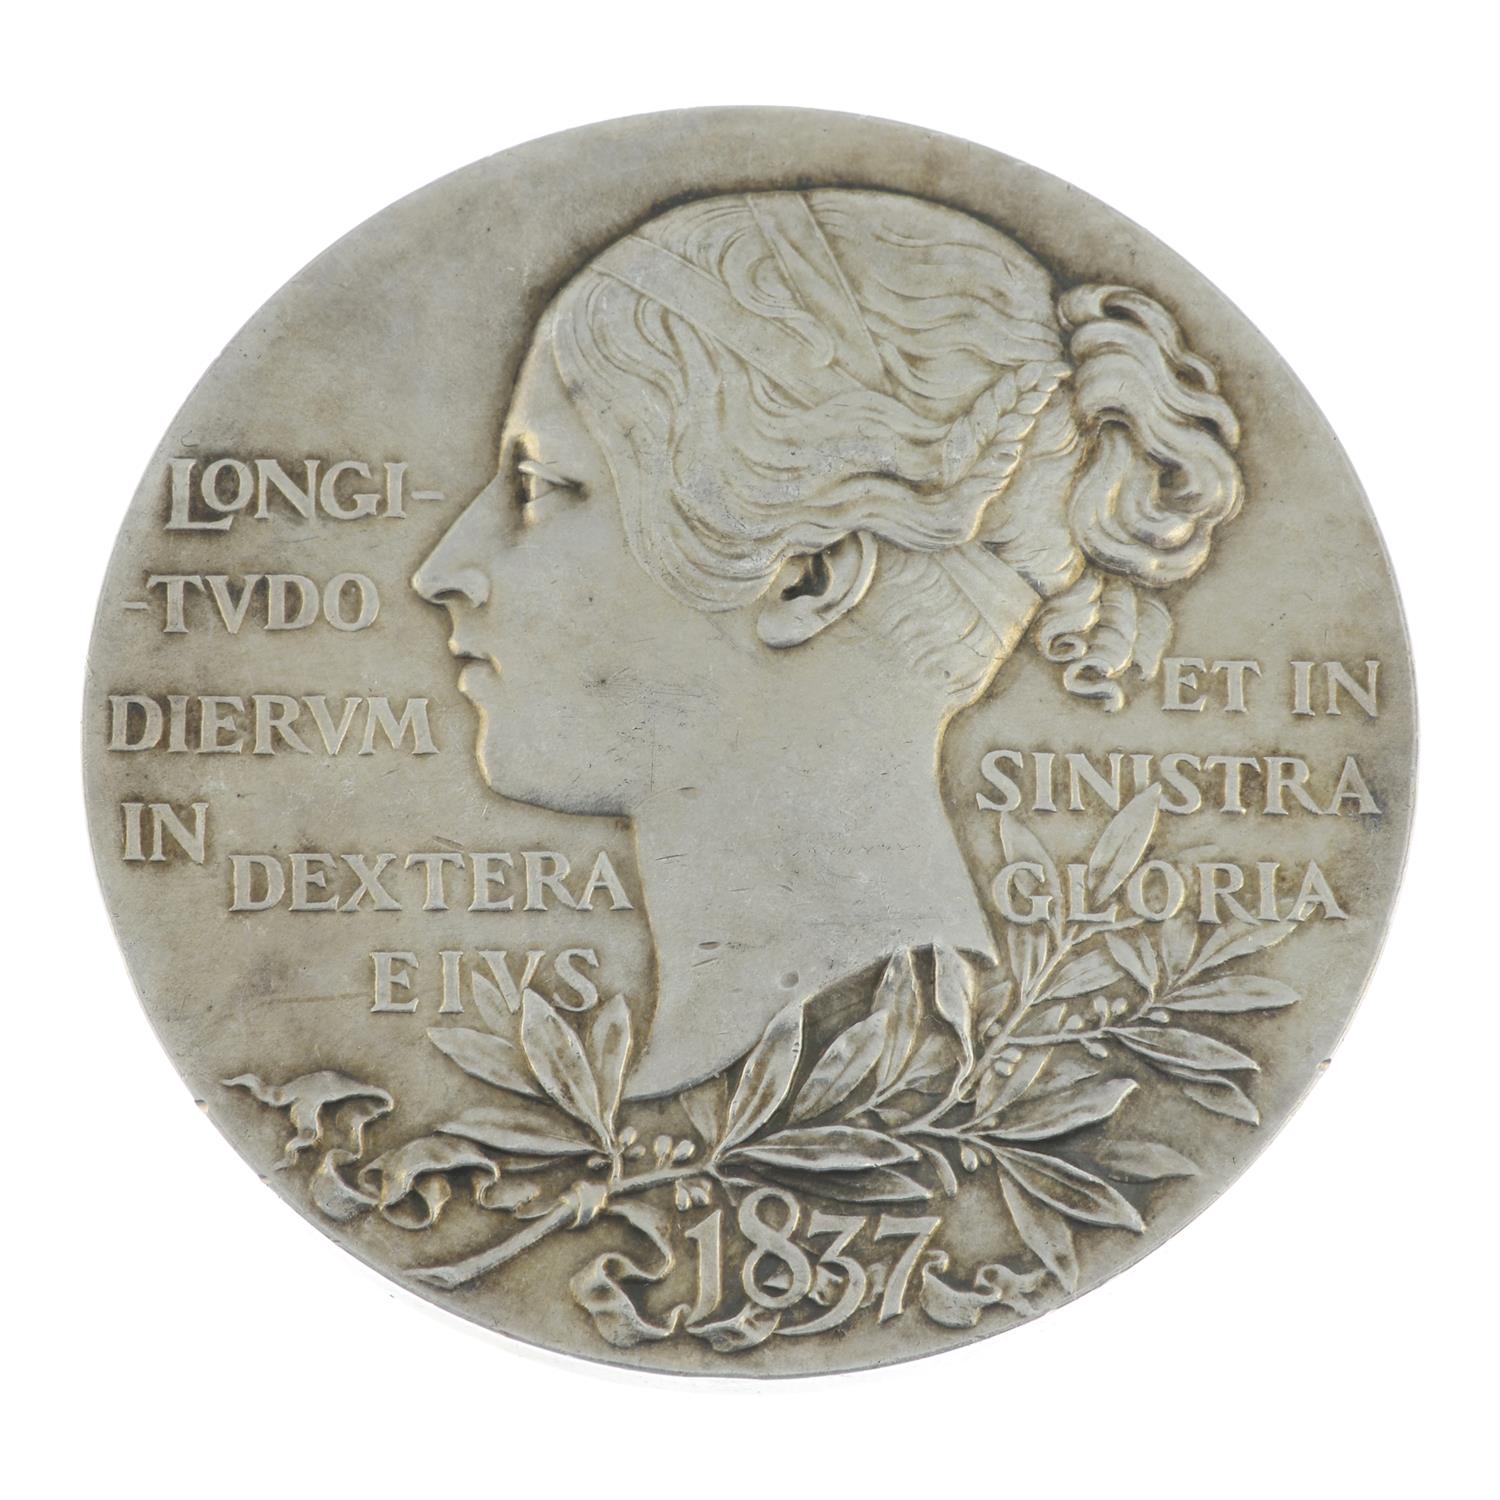 Victoria, Diamond Jubilee 1897, large silver medal. - Image 2 of 2